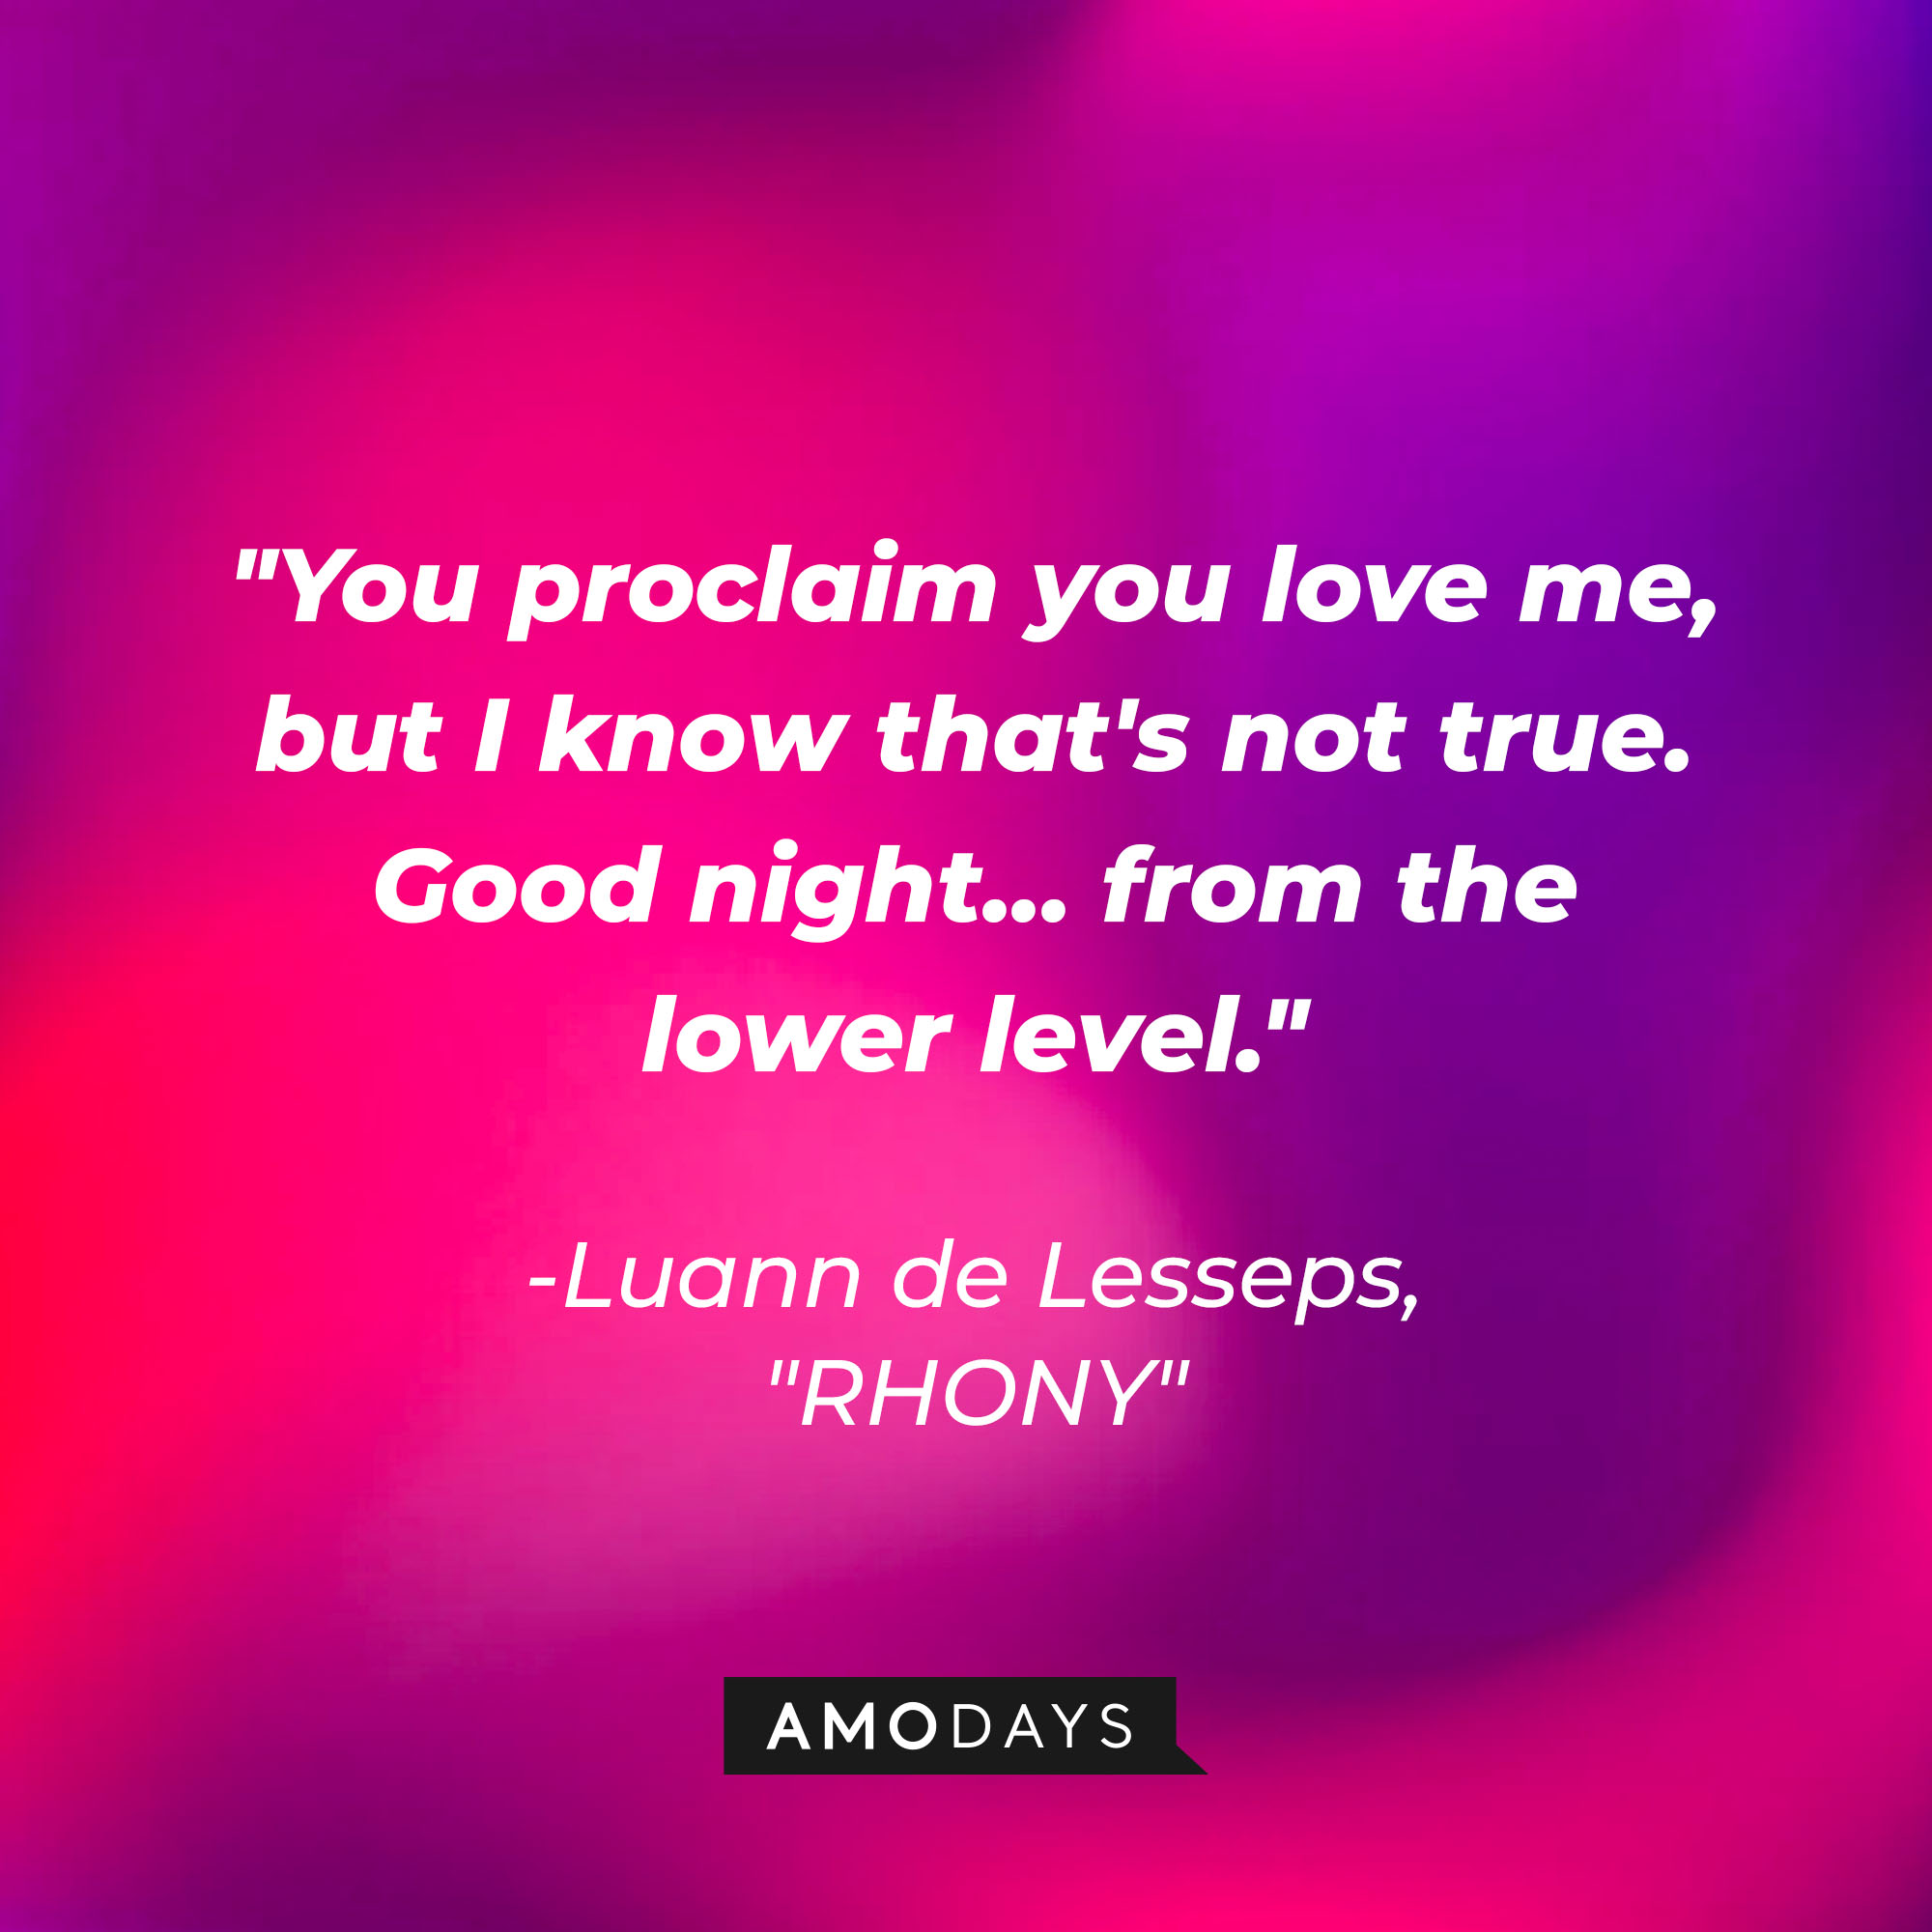 Luann de Lesseps' quote: "You proclaim you love me but I know that's not true. Good night...from the lower level" | Source: Amodays